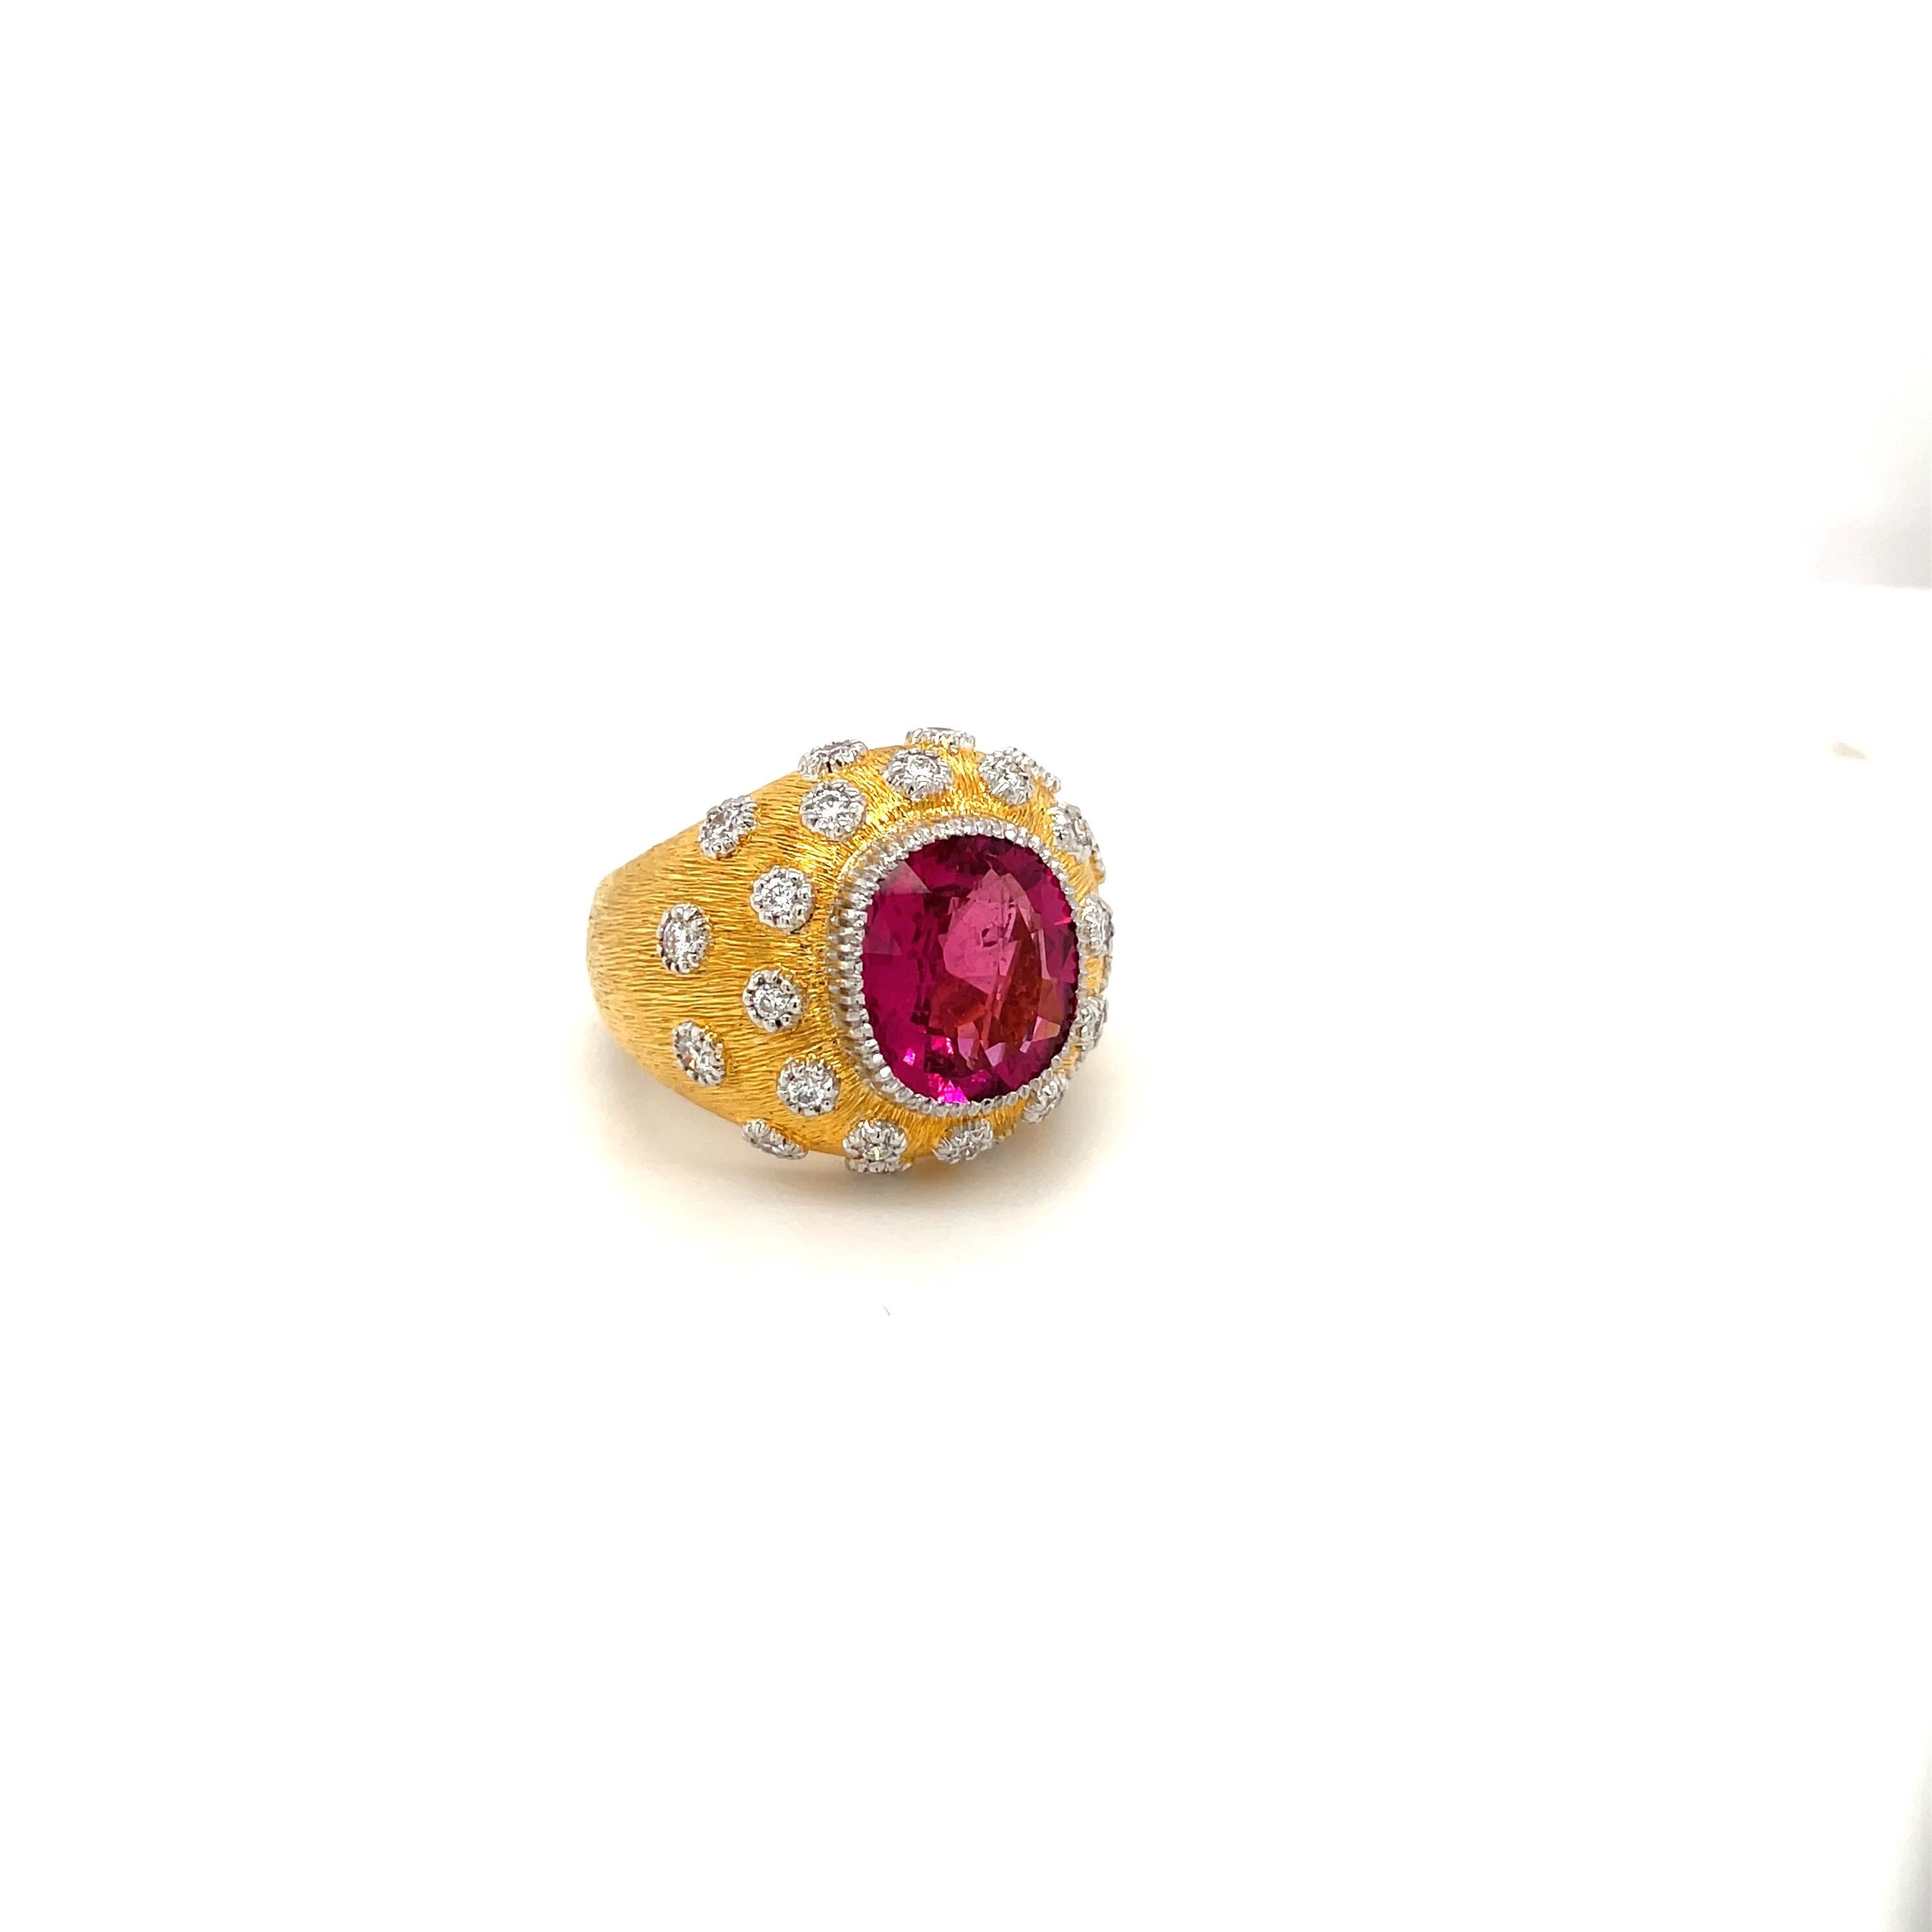 This dome shaped 18 karat yellow gold ring set is set with a vibrant oval rubelite in a white gold bezel. The yellow gold ring has a florentine finish and is sprinkled throughout with round diamonds in small white gold bezels.
Rubelite = 4.40